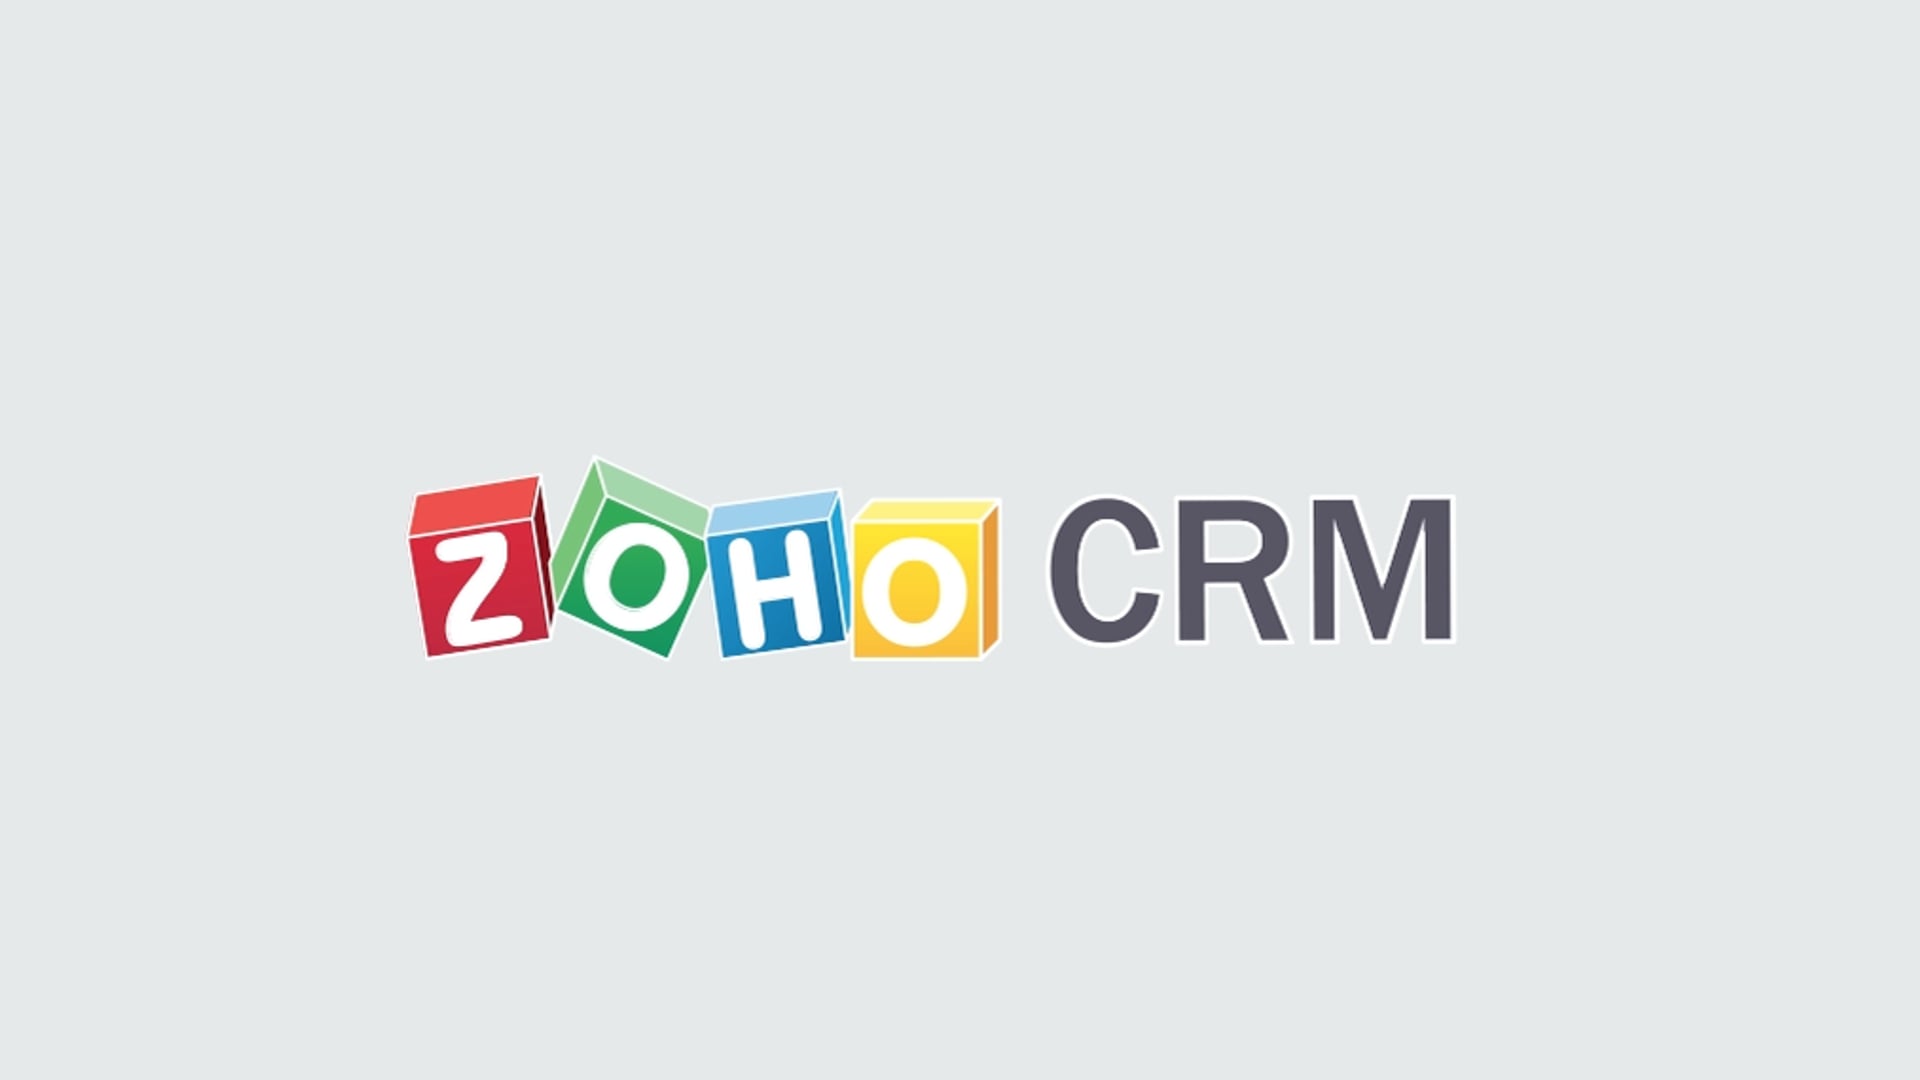 Get to know Zoho CRM